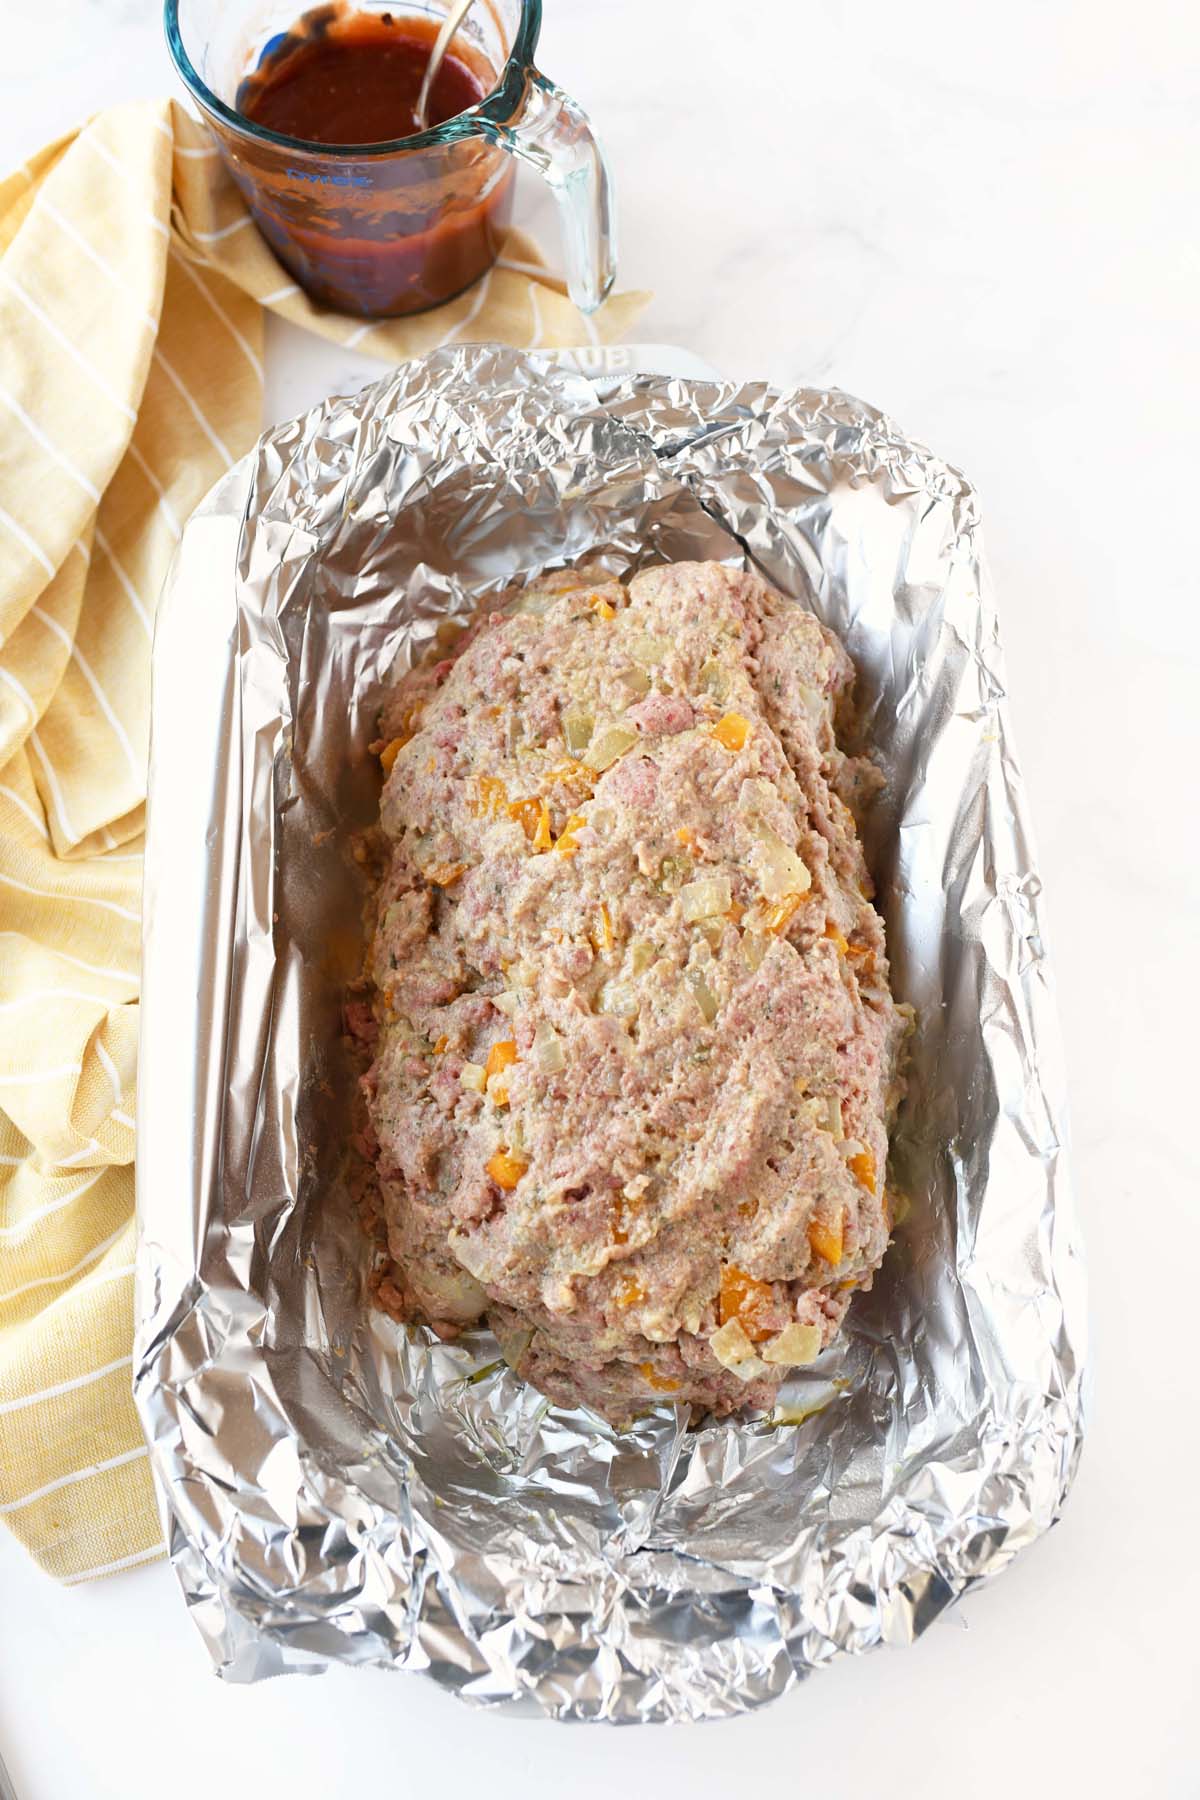 Meatloaf in foil on a white table.